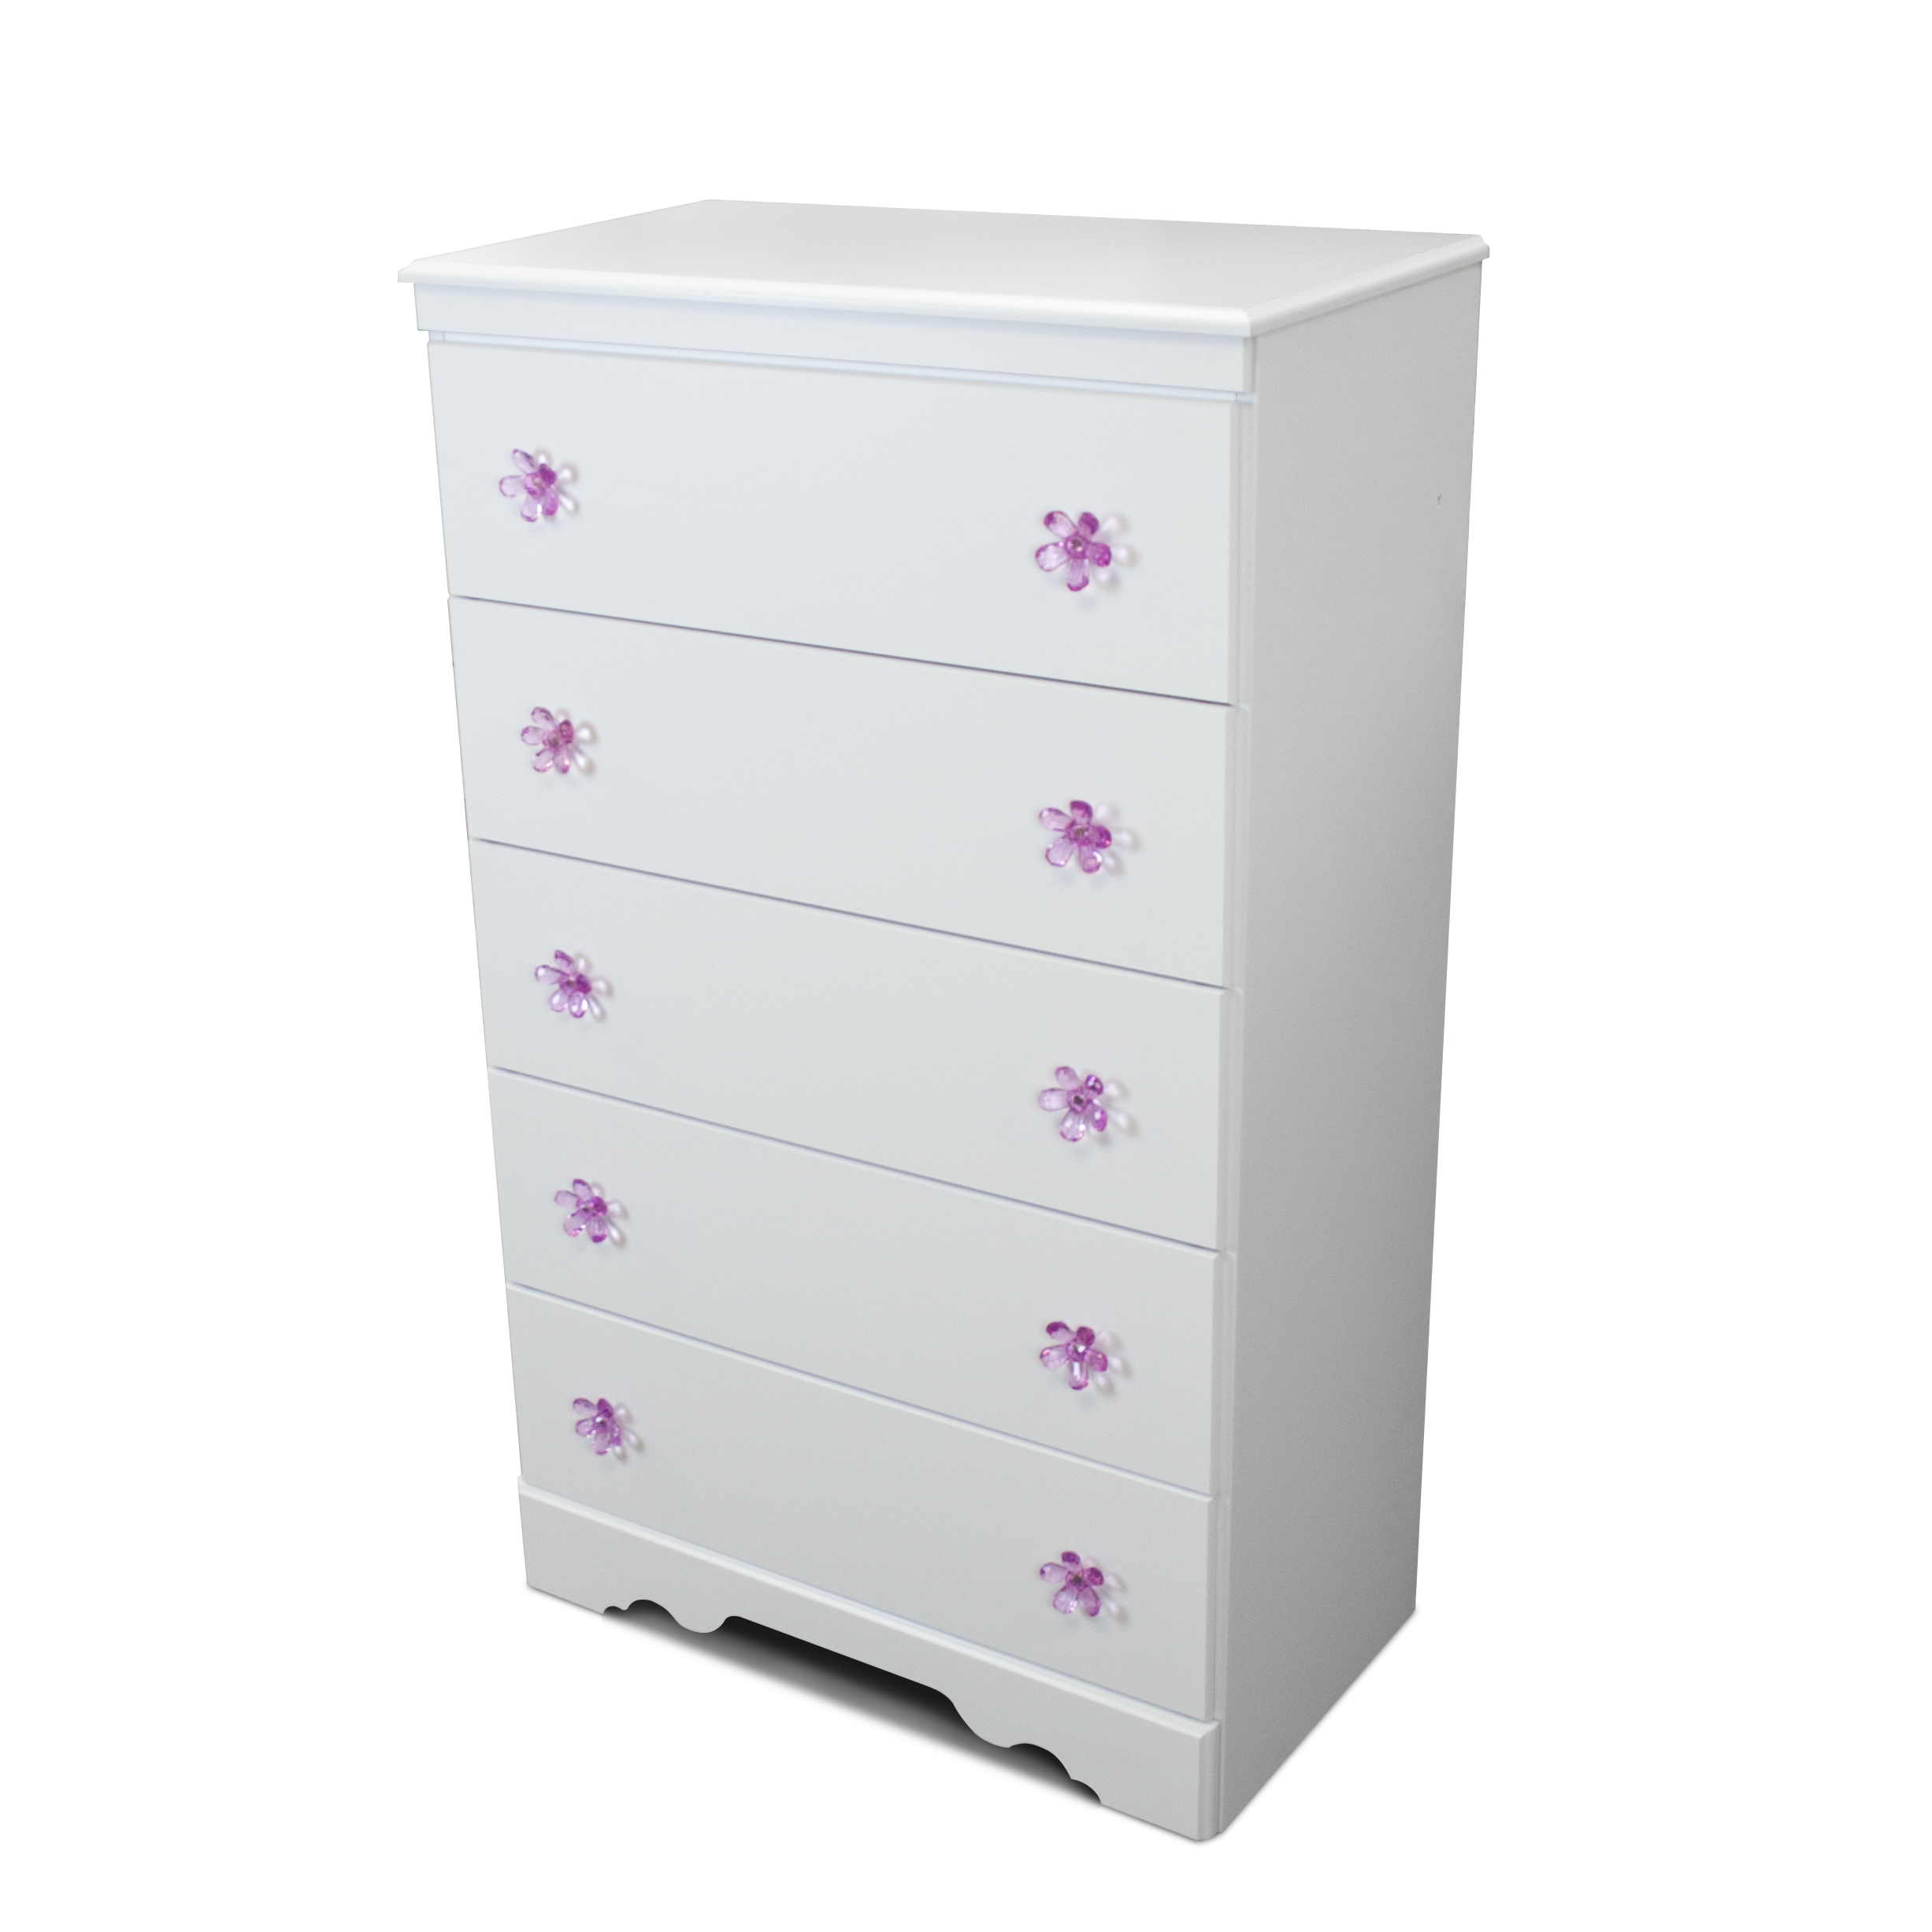 American Furniture Classics Savannah Collection 269K3TT Three Piece White Bedroom set with attractive pink and purple pulls including Twin over Twin Metal Bunkbed, Night Stand, and Five Drawer Chest - image 5 of 9